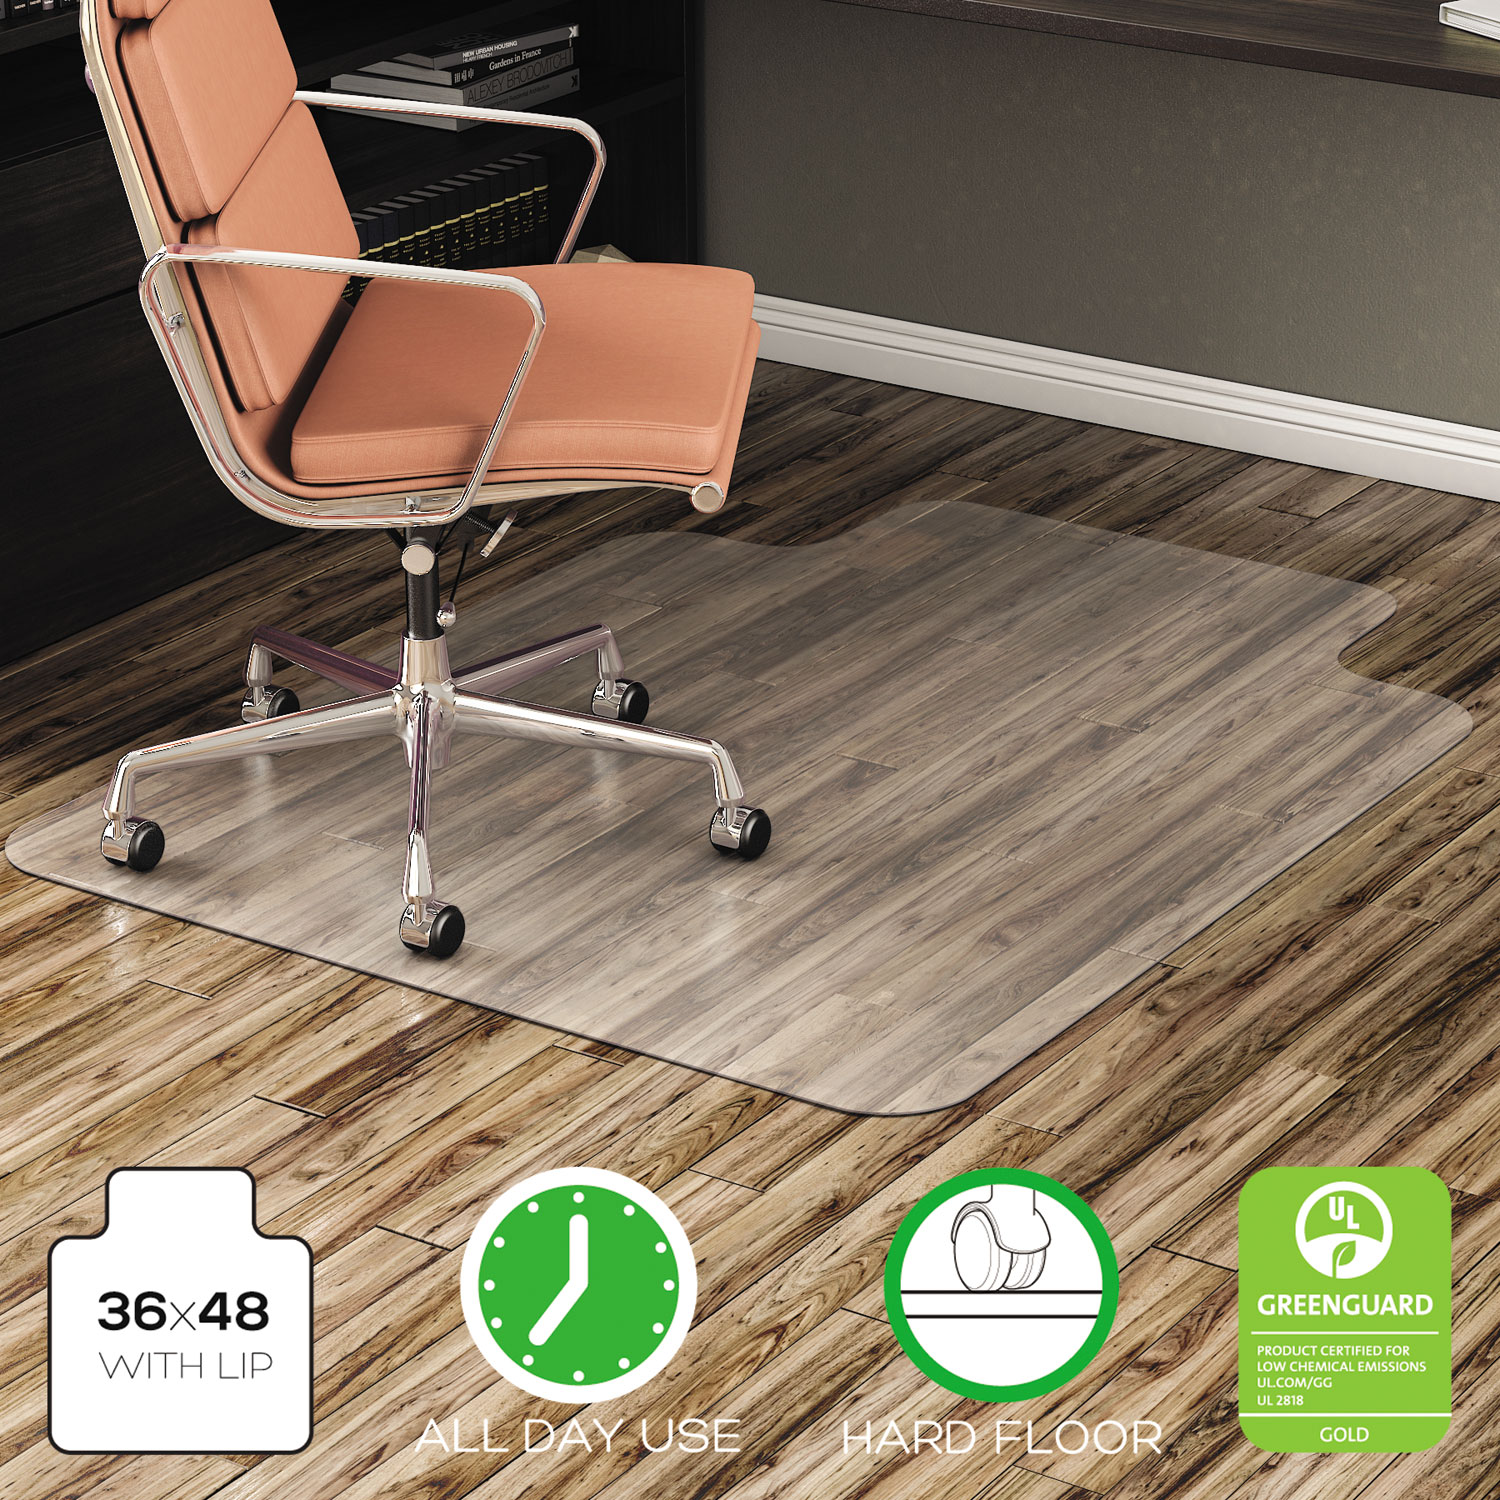  deflecto CM21112 EconoMat All Day Use Chair Mat for Hard Floors, 36 x 48, Lipped, Clear (DEFCM21112) 